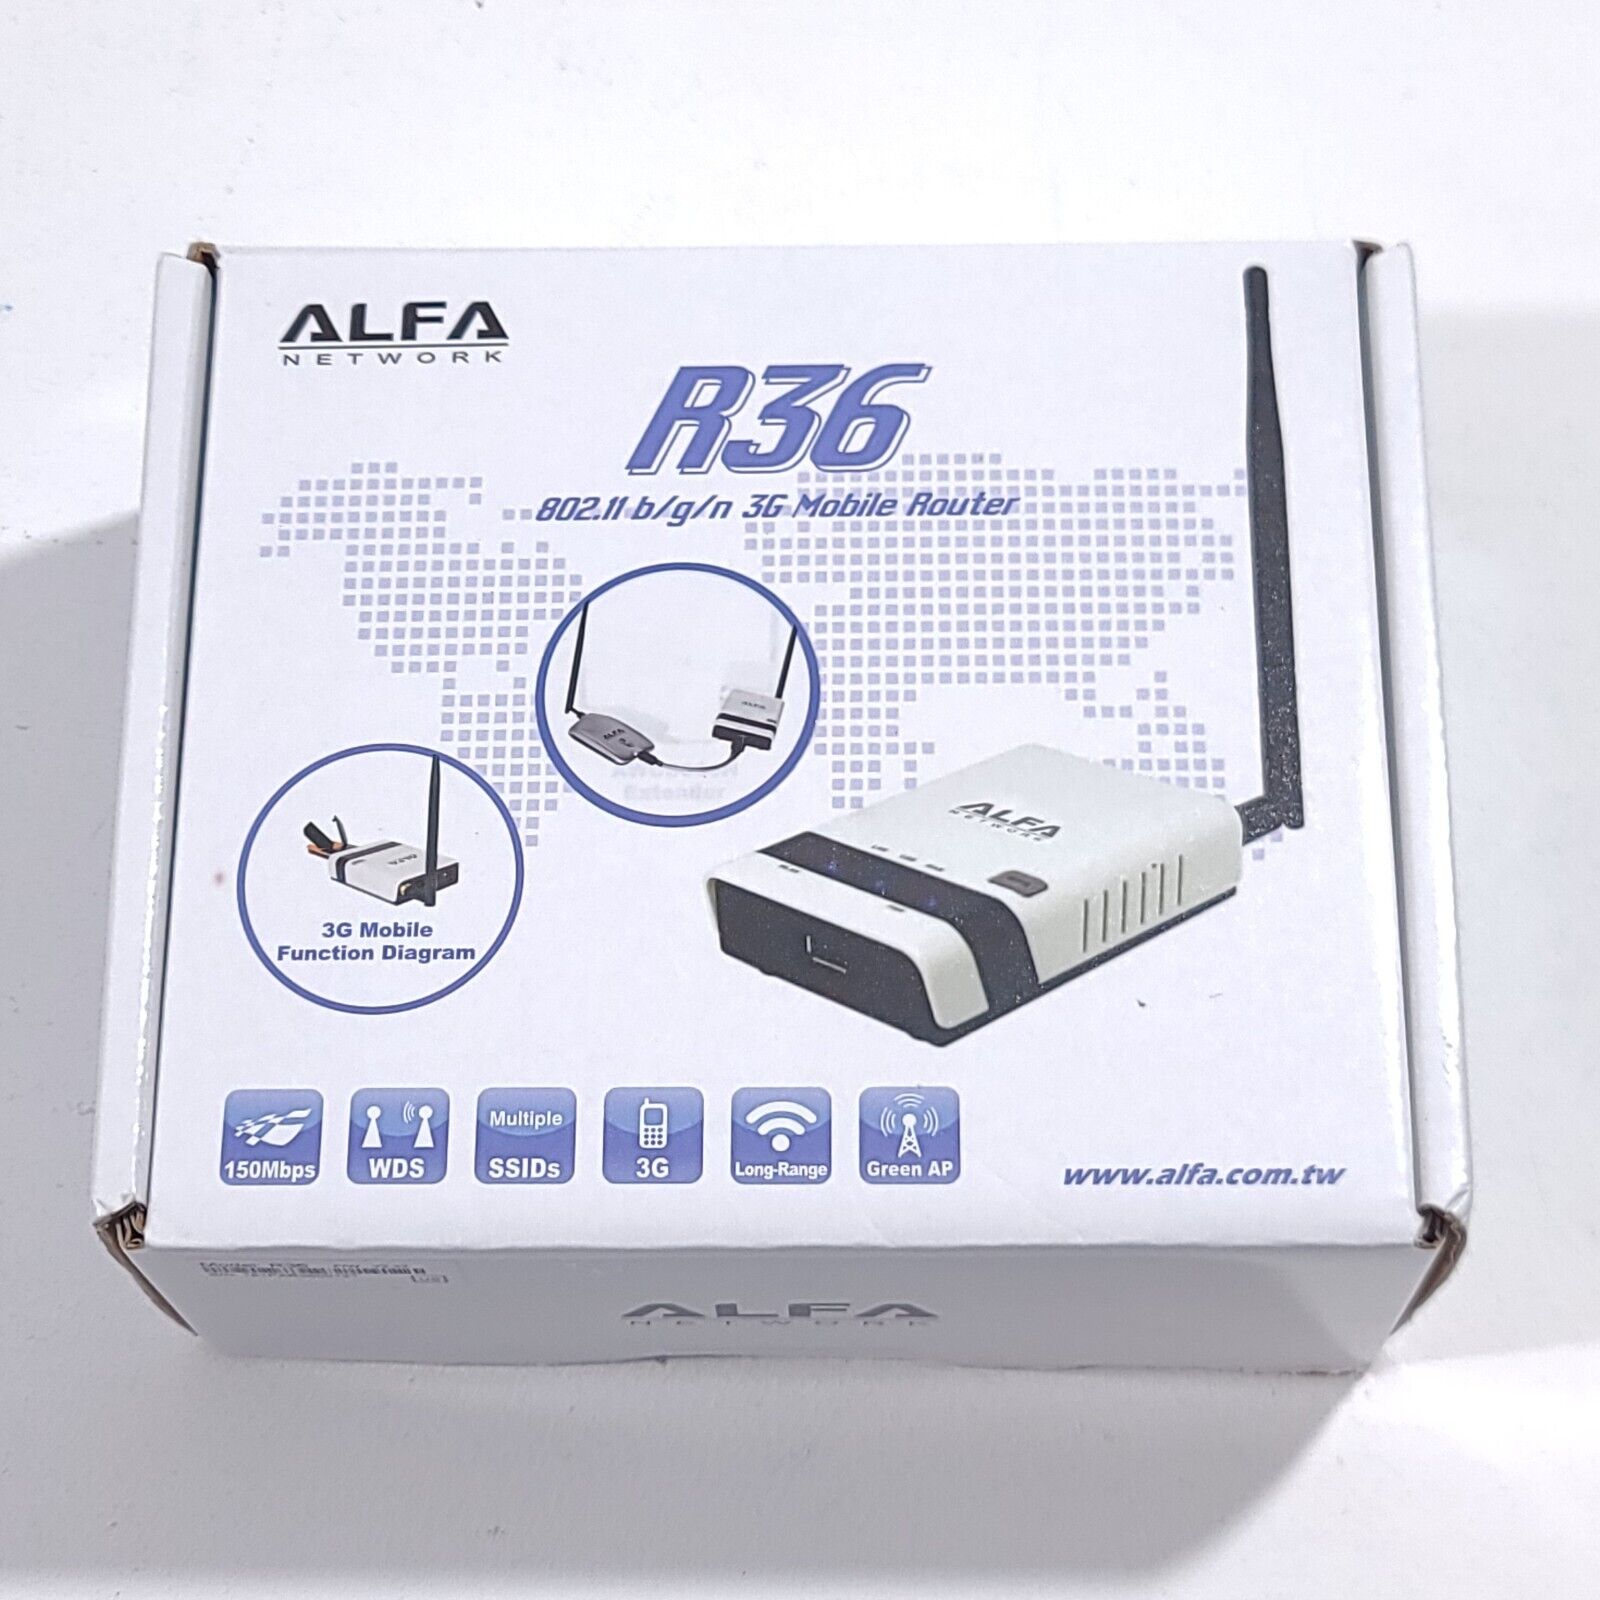 ALFA Network R36 802.11 b/g/n 3G Mobile Router